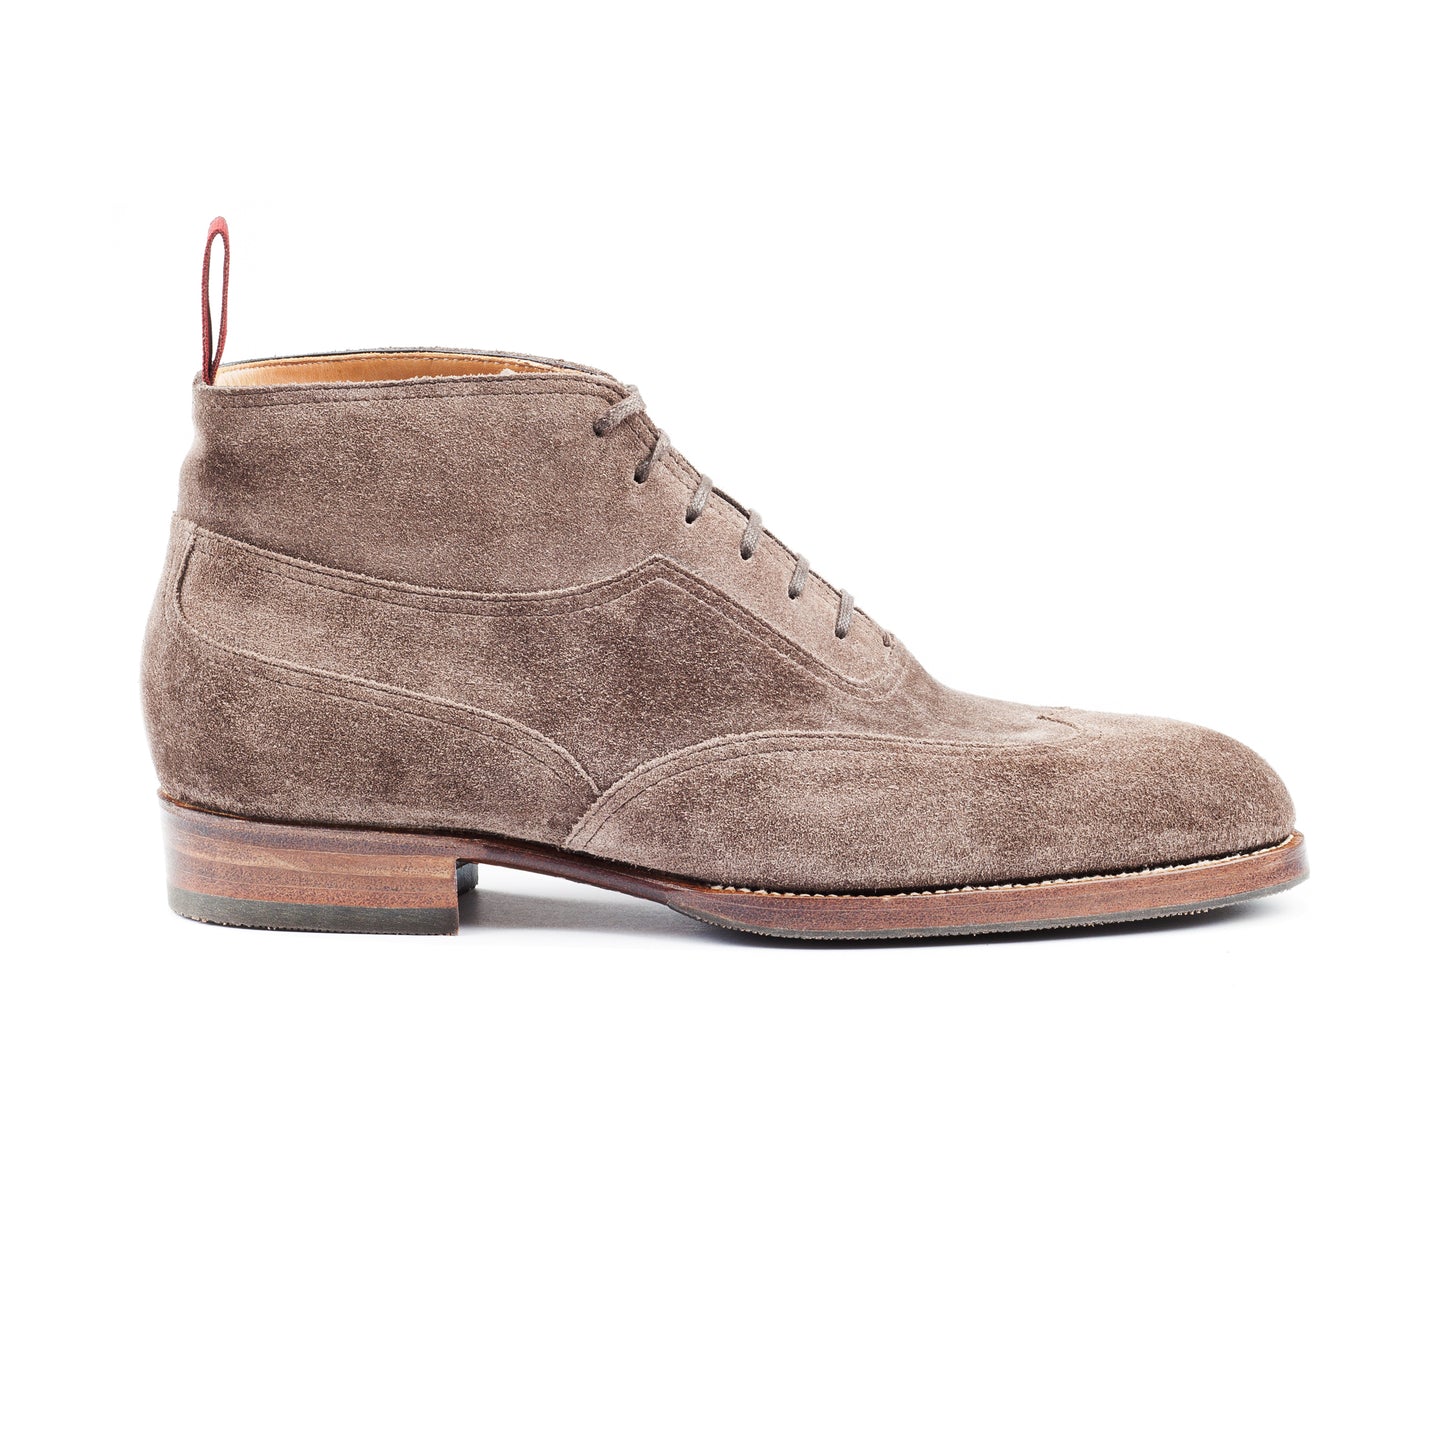 Oxford bootee, plain sewn wing tip